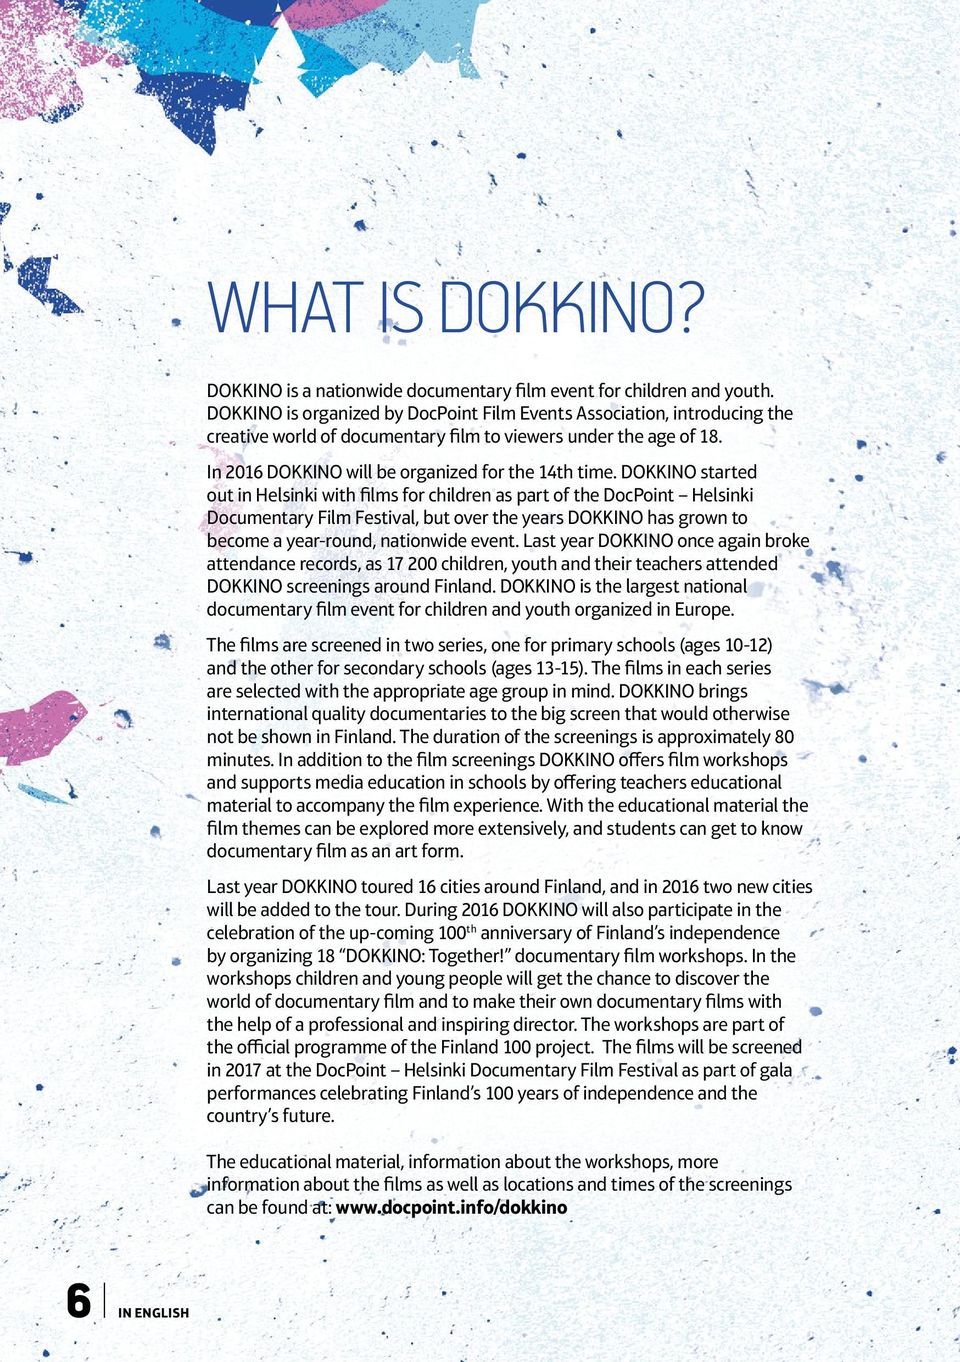 DOKKINO started out in Helsinki with films for children as part of the DocPoint Helsinki Documentary Film Festival, but over the years DOKKINO has grown to become a year-round, nationwide event.